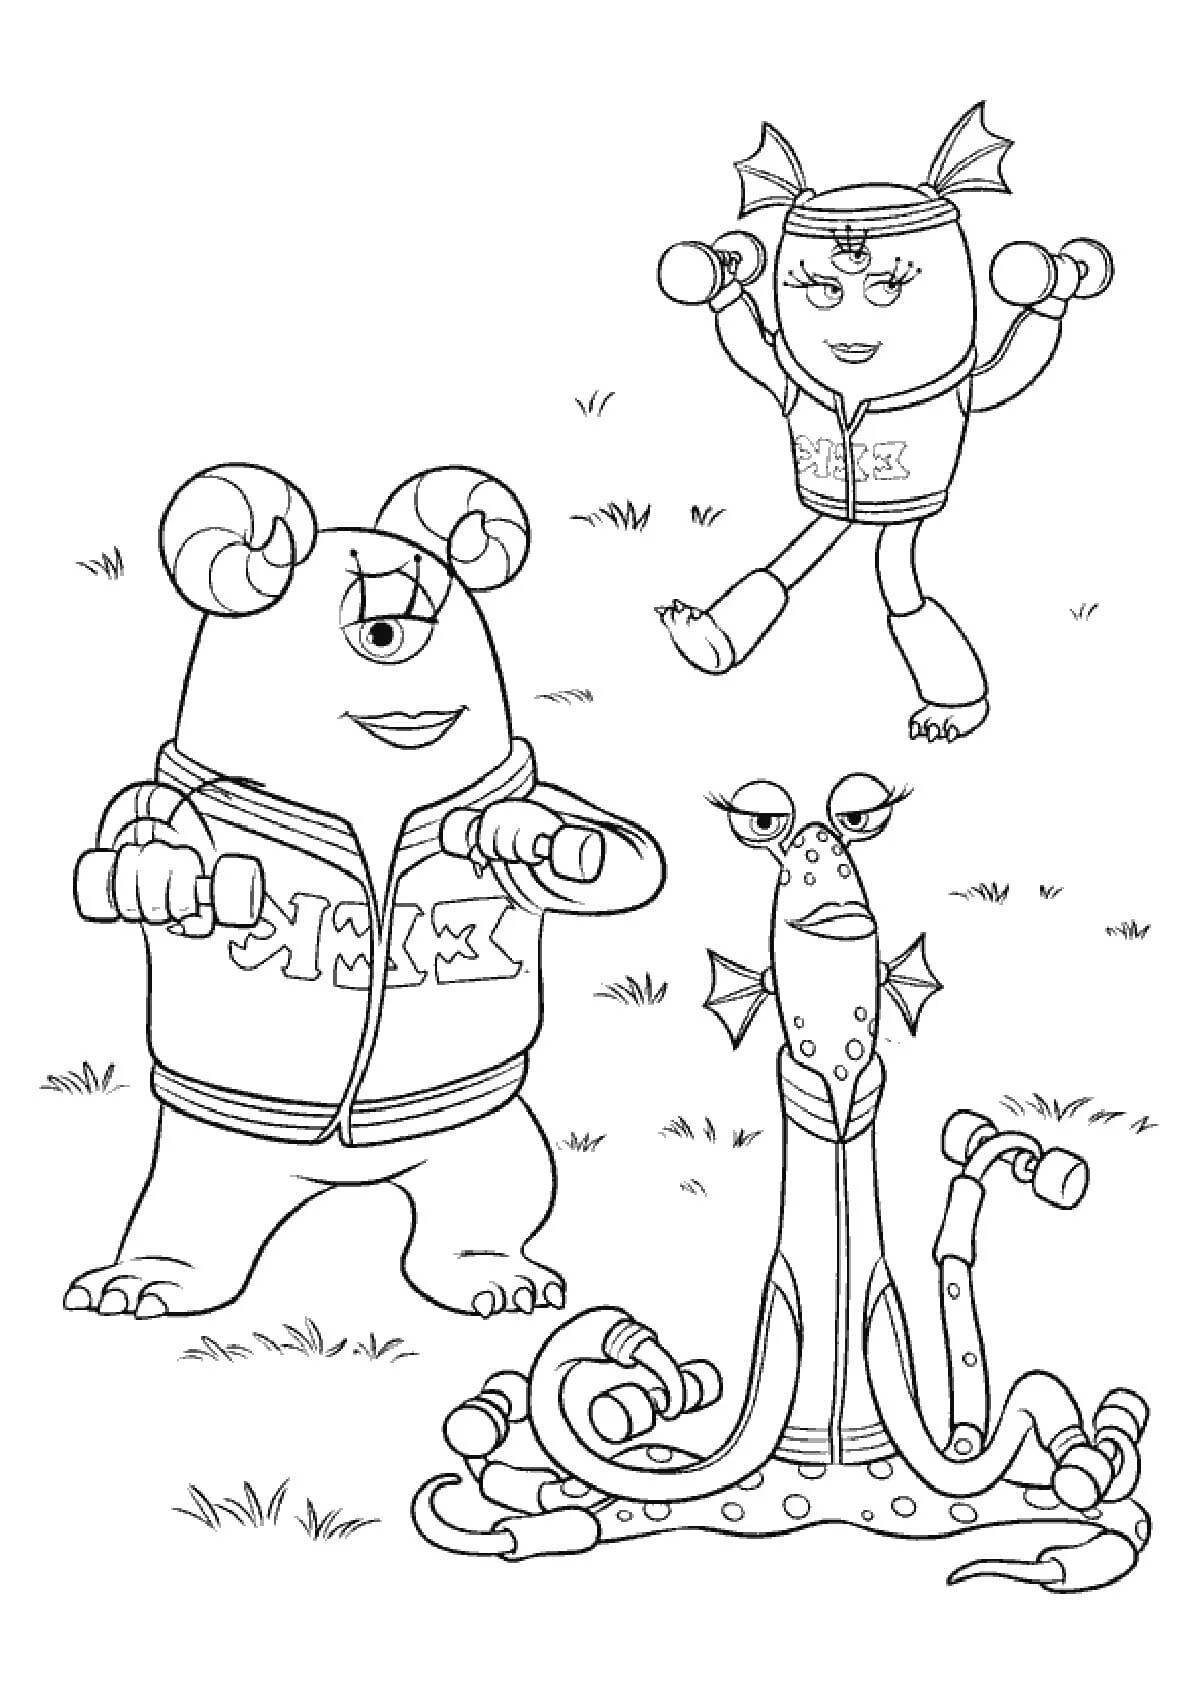 Sweet monsters university coloring page